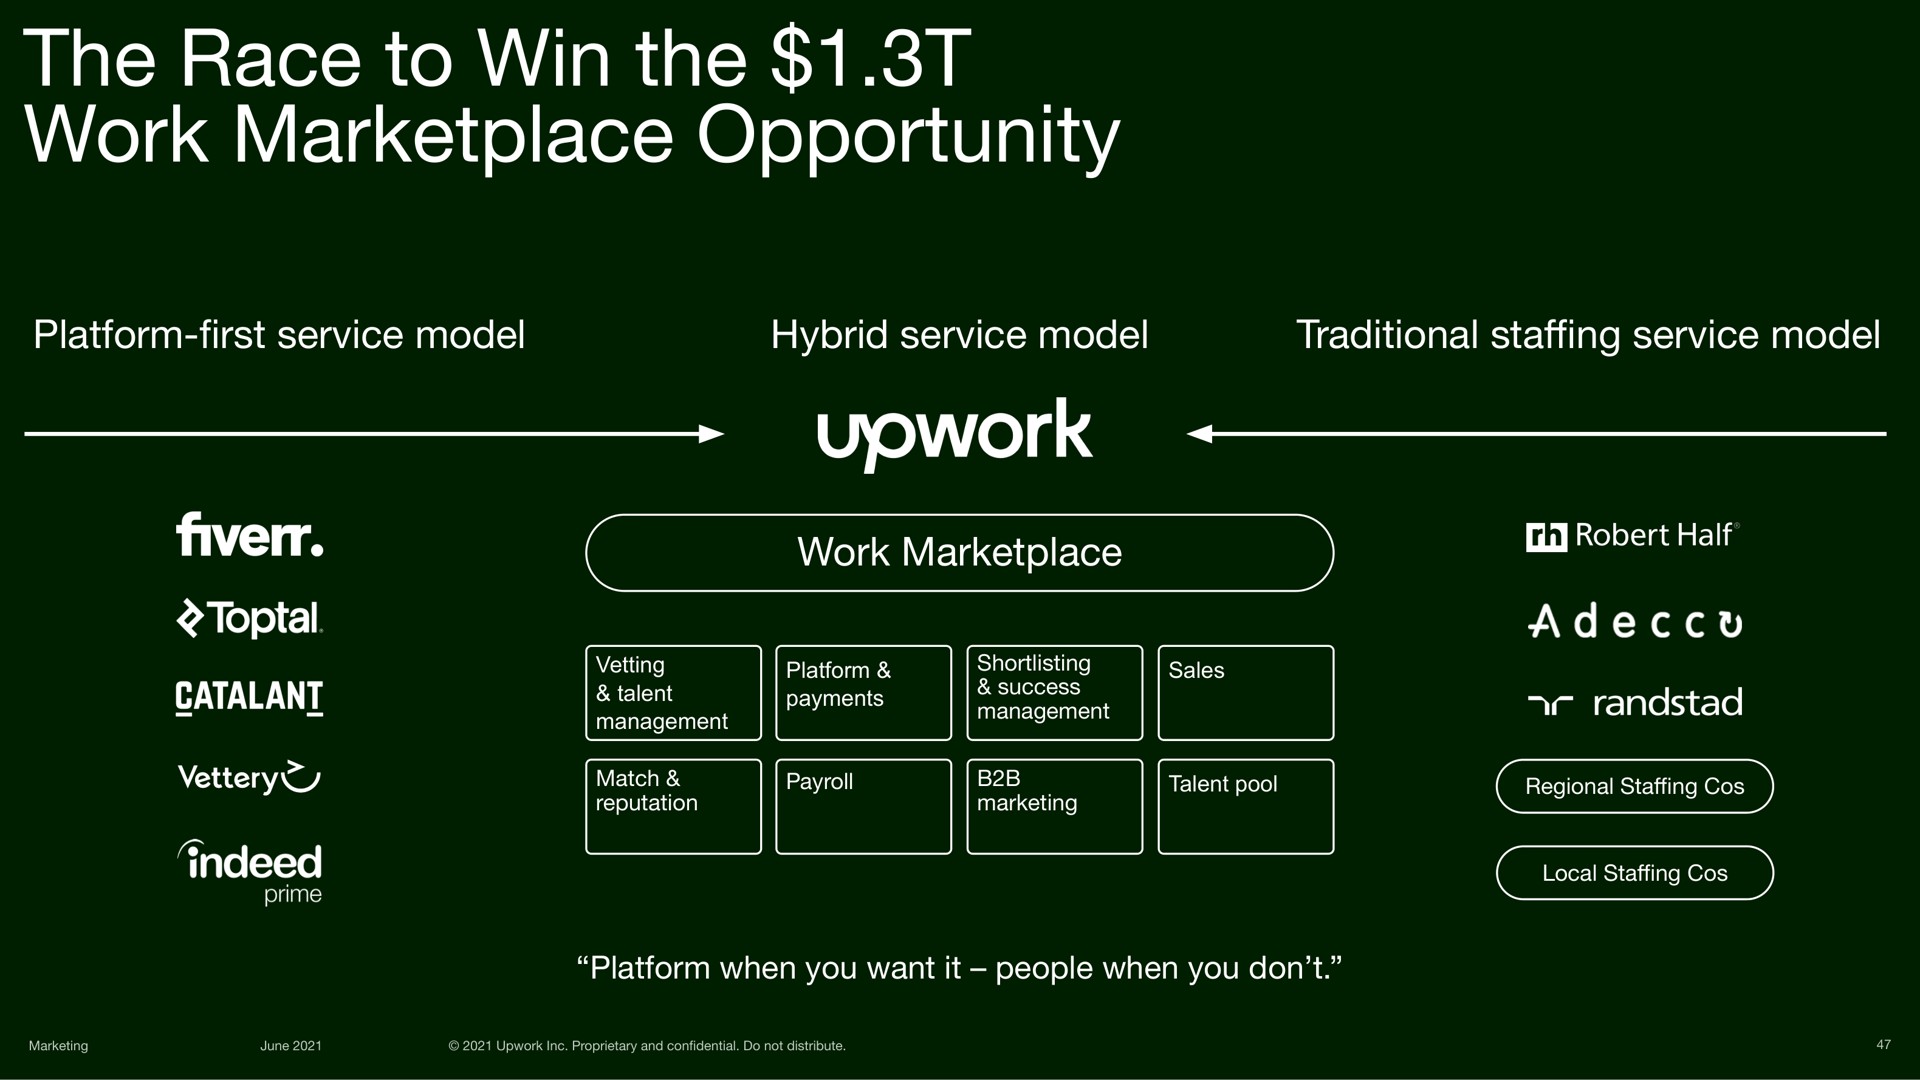 the race to win the work opportunity | Upwork